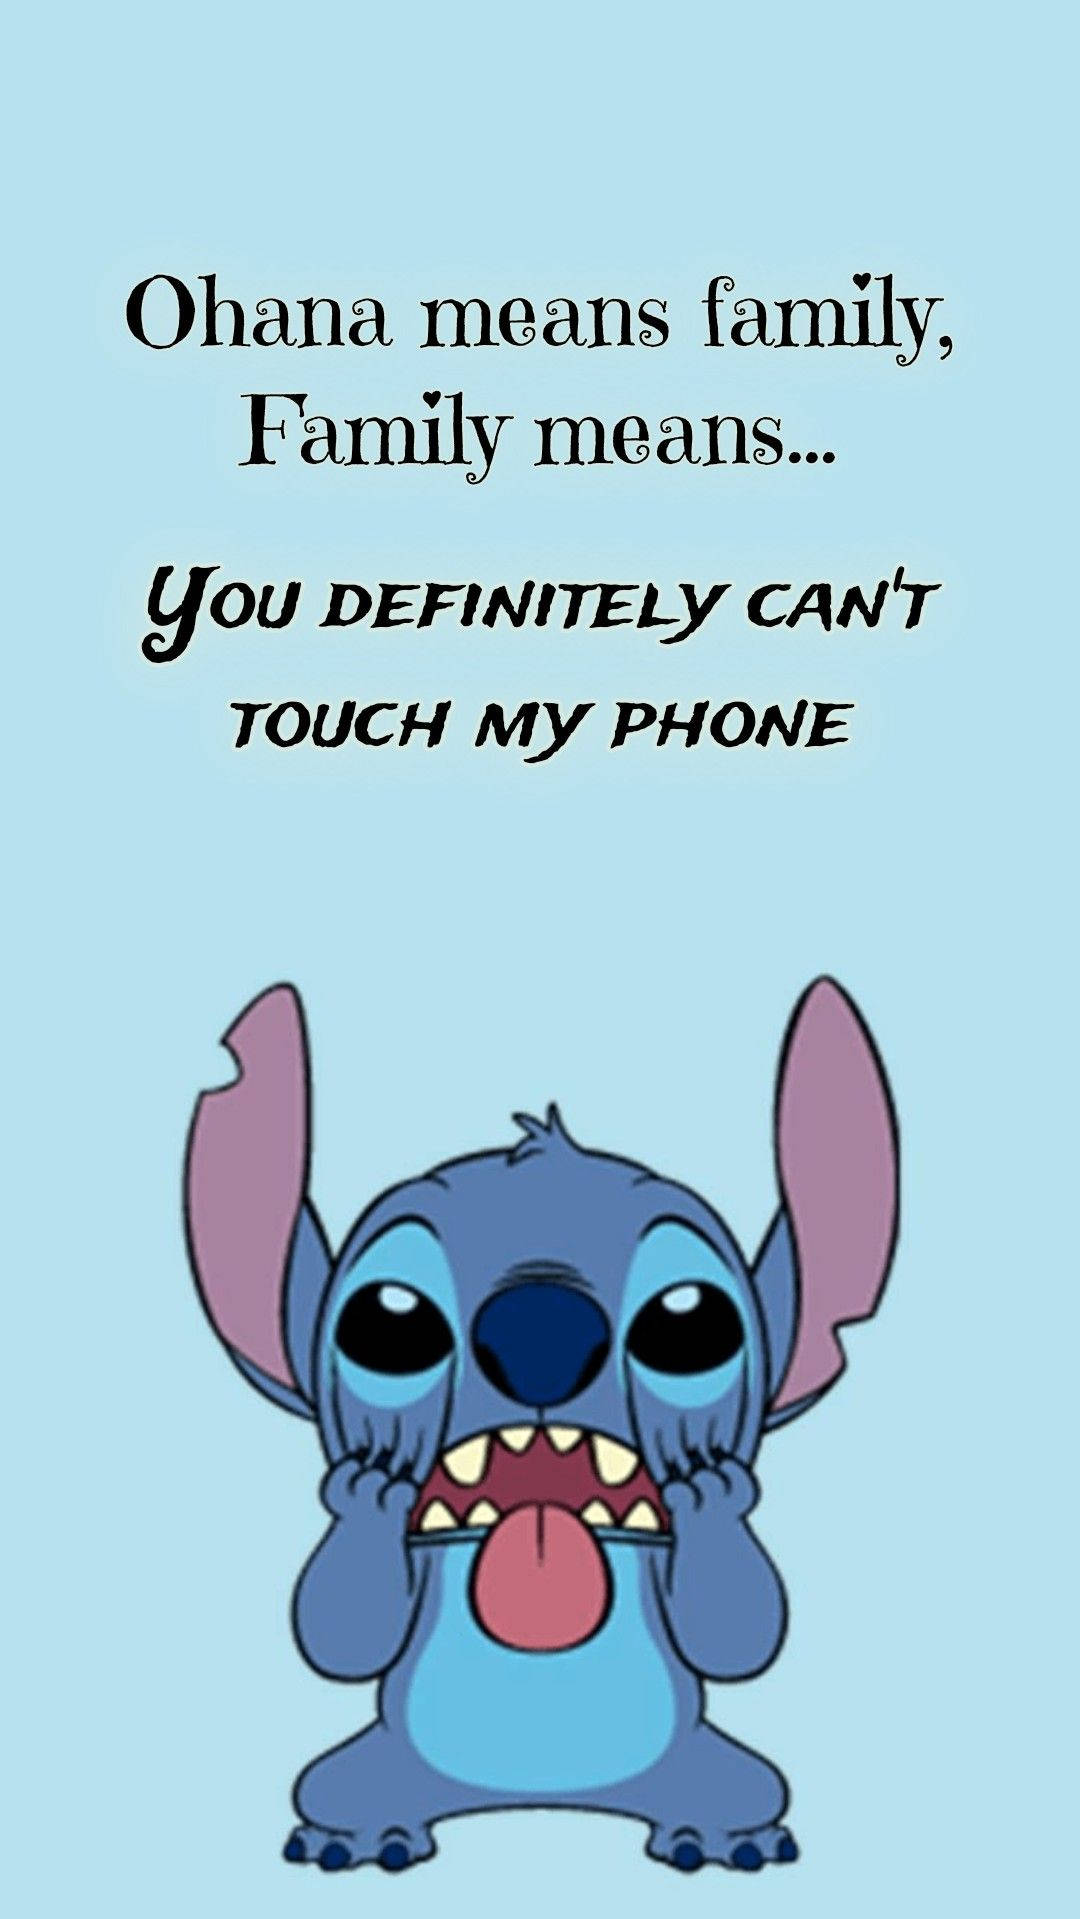 Stitch Phone Wallpapers